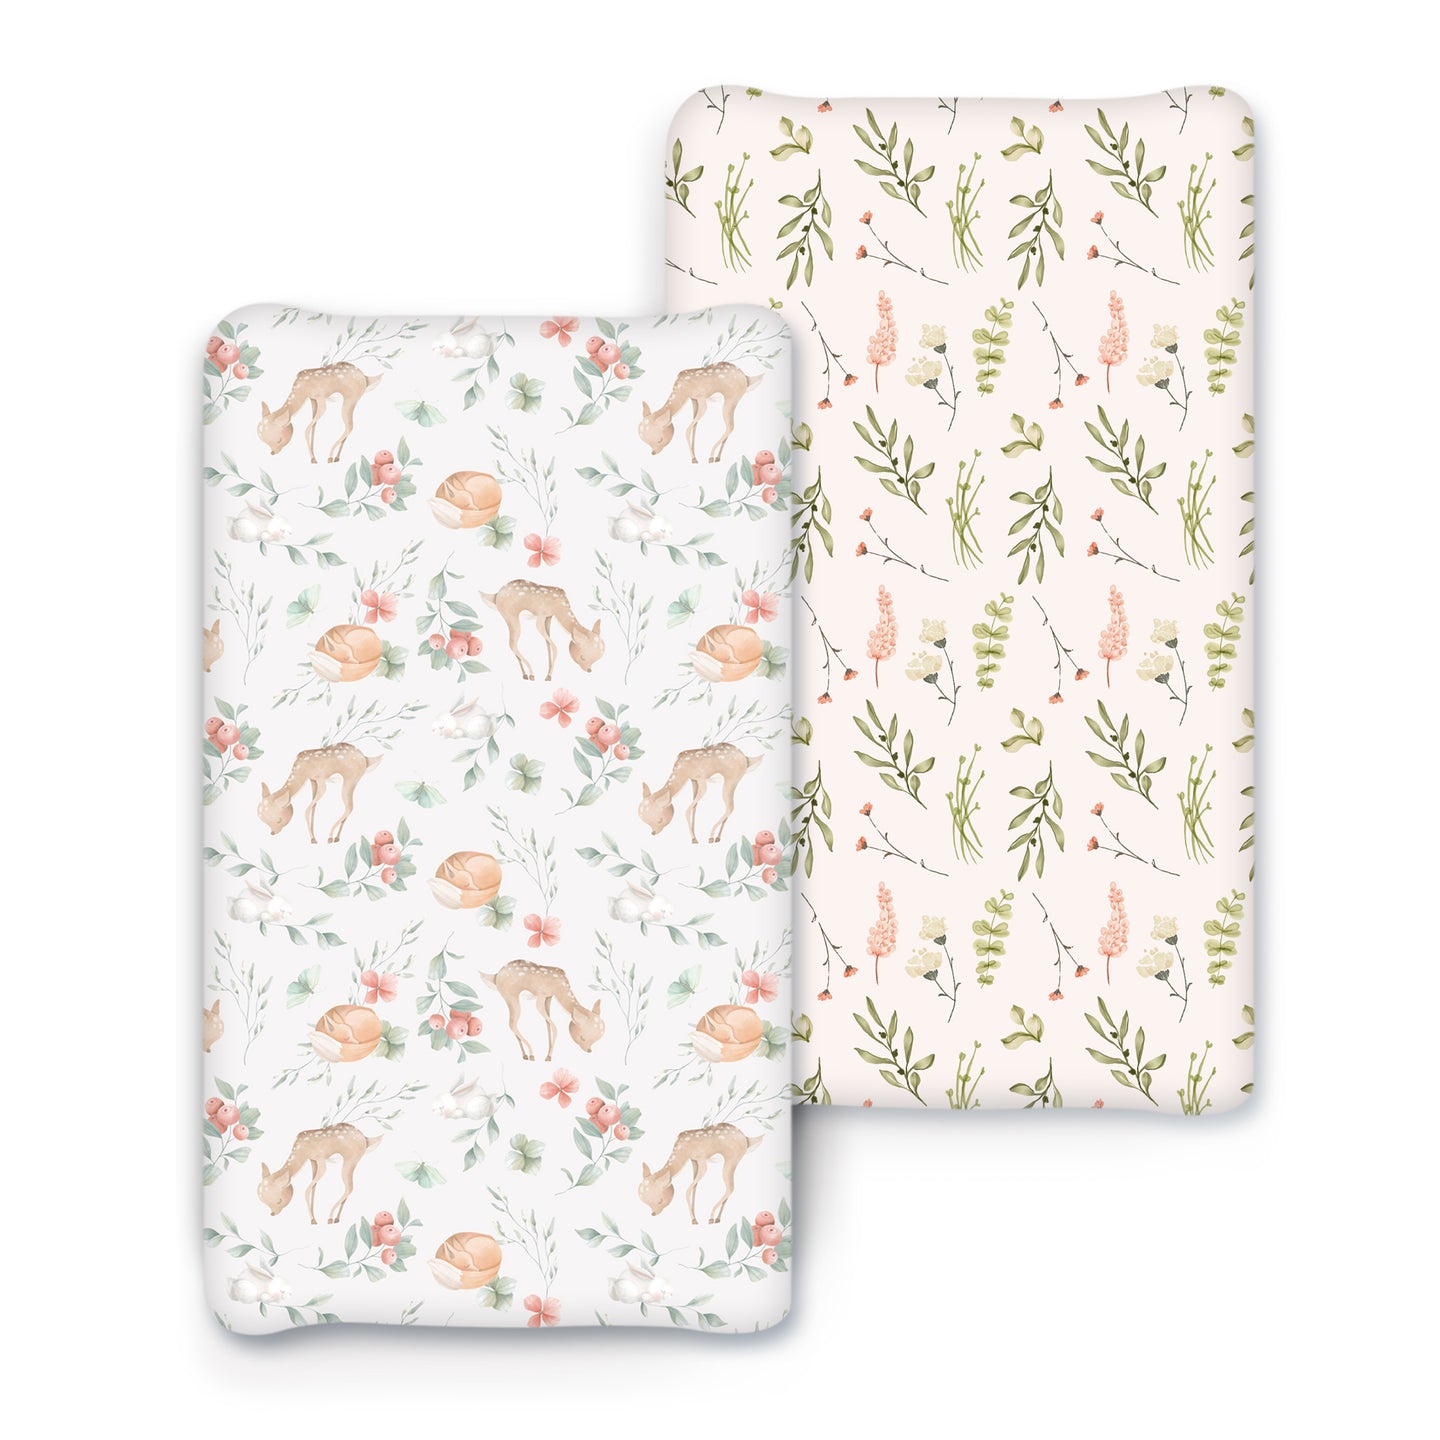 Acrabros Snug Fitted Changing Pad Cover Set Deer Floral